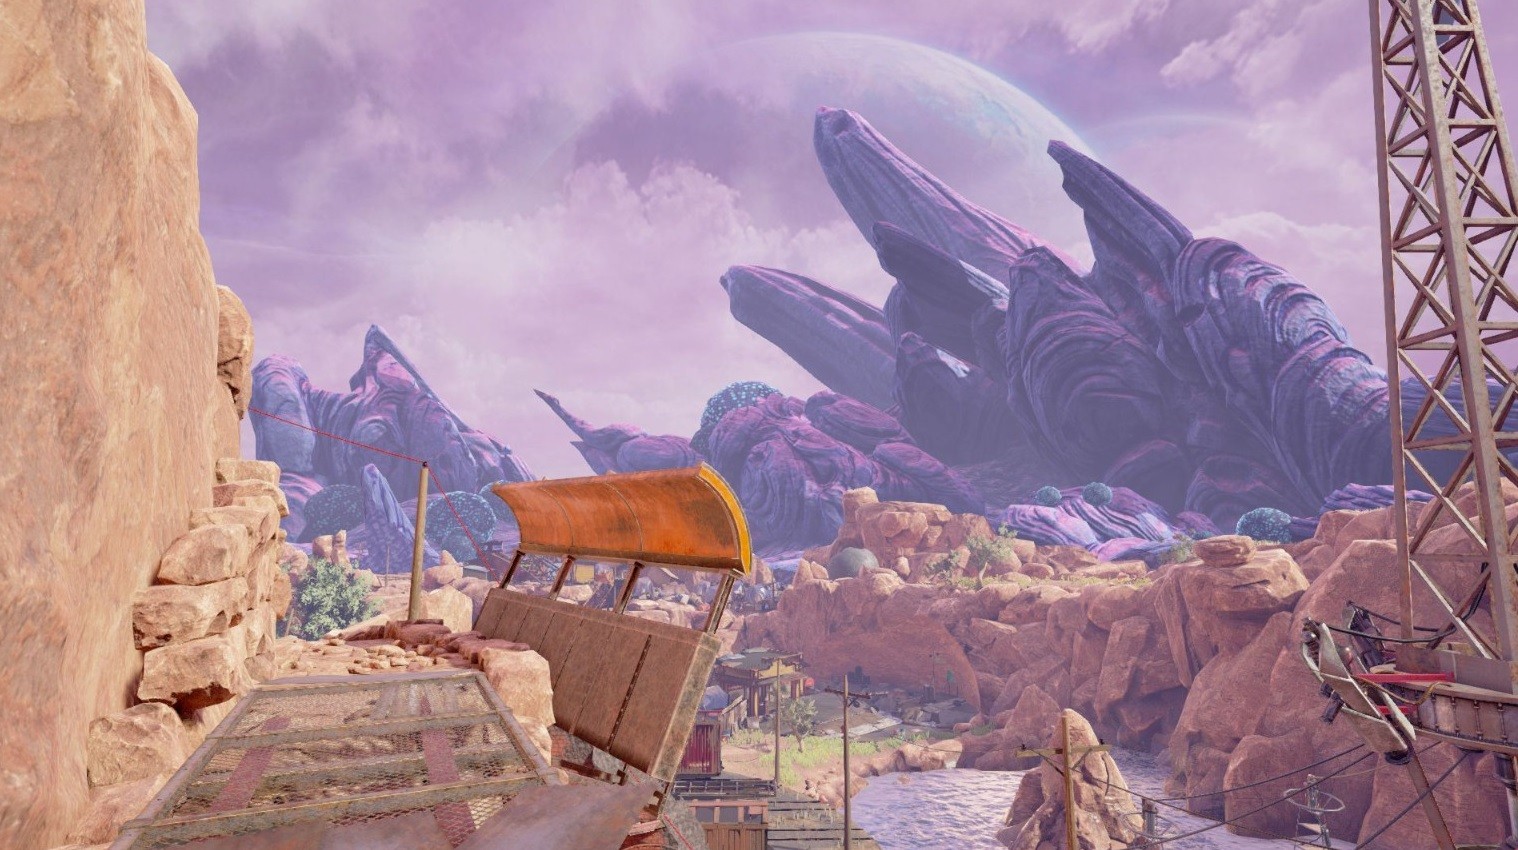 download obduction switch